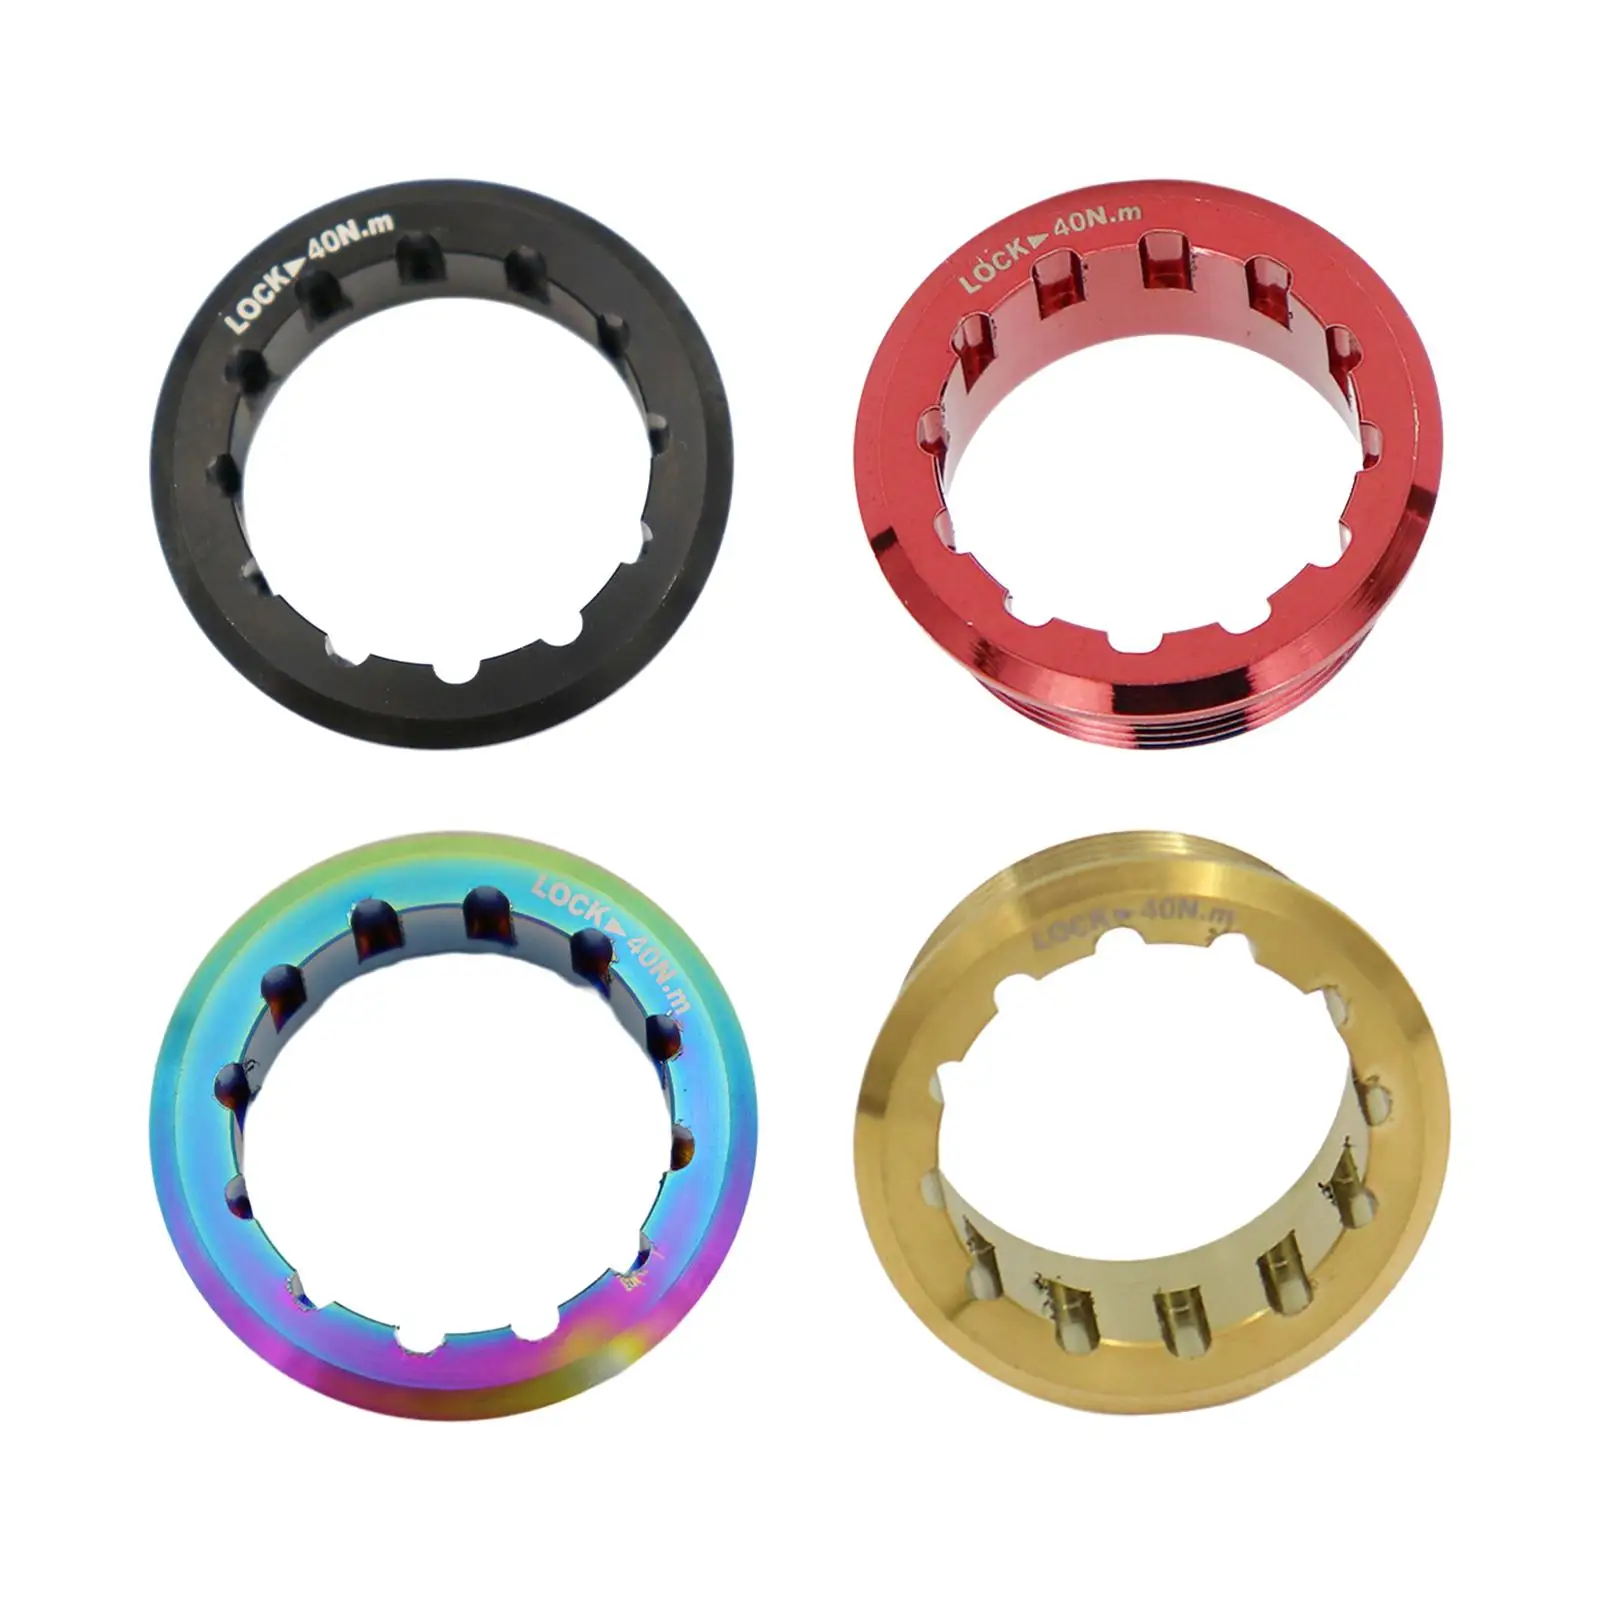 Bike Cassette Lock Rings Waterproof Freewheel Cog Cover Bicycle Flywheel Ring Cover for Outdoor Sports Cycling Accessory Riding